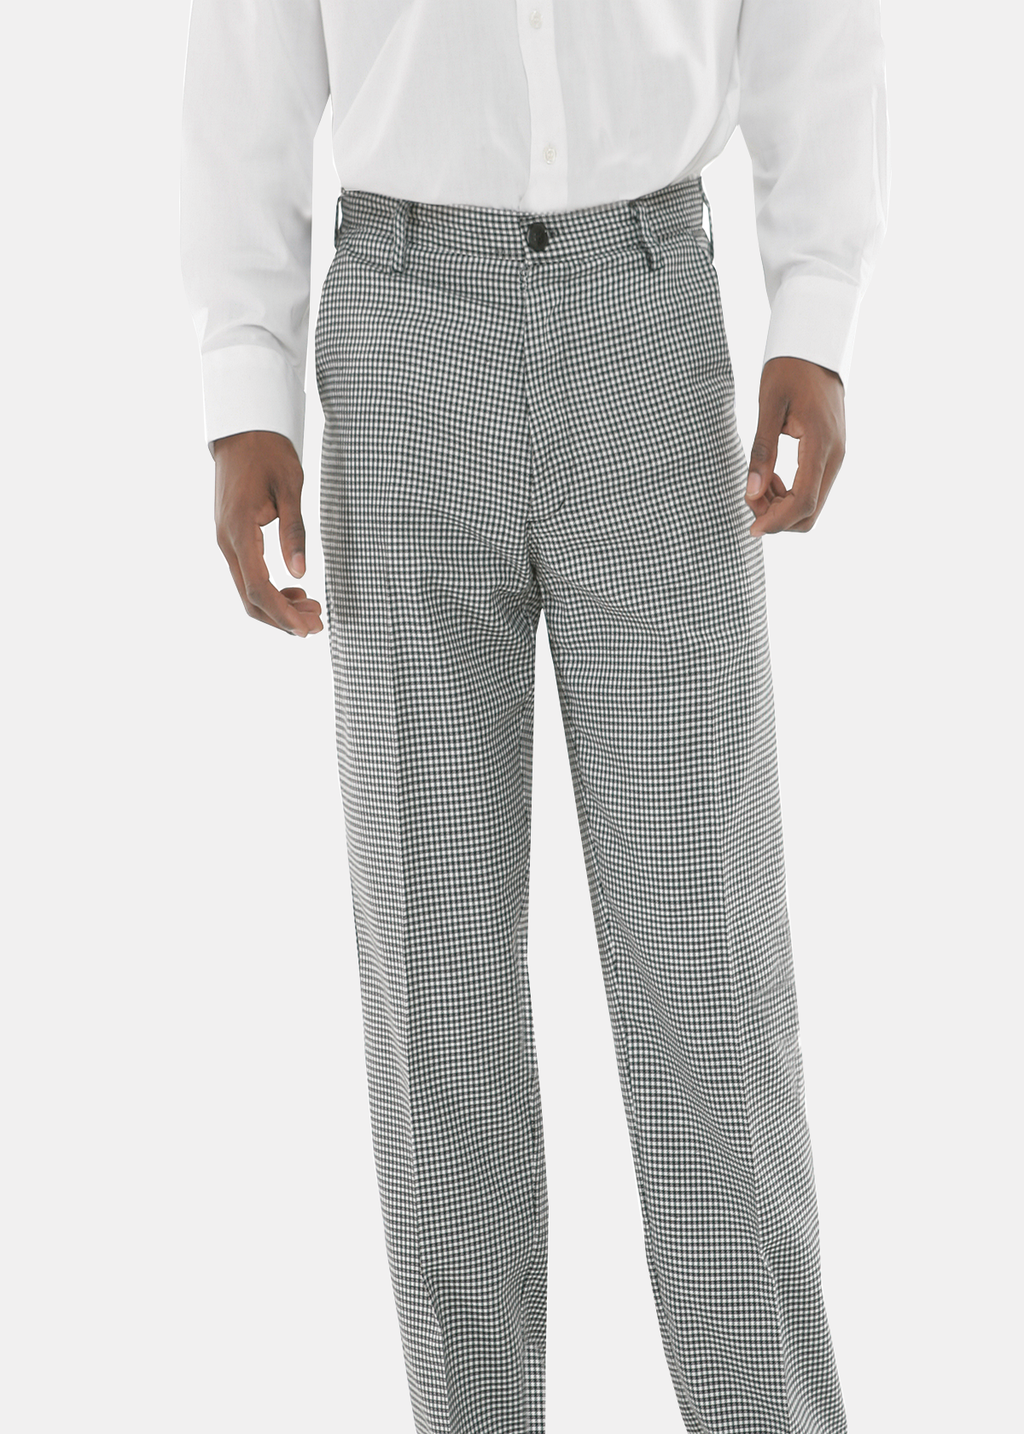 Product - MOBB Clearance Flat Front Chef Pant